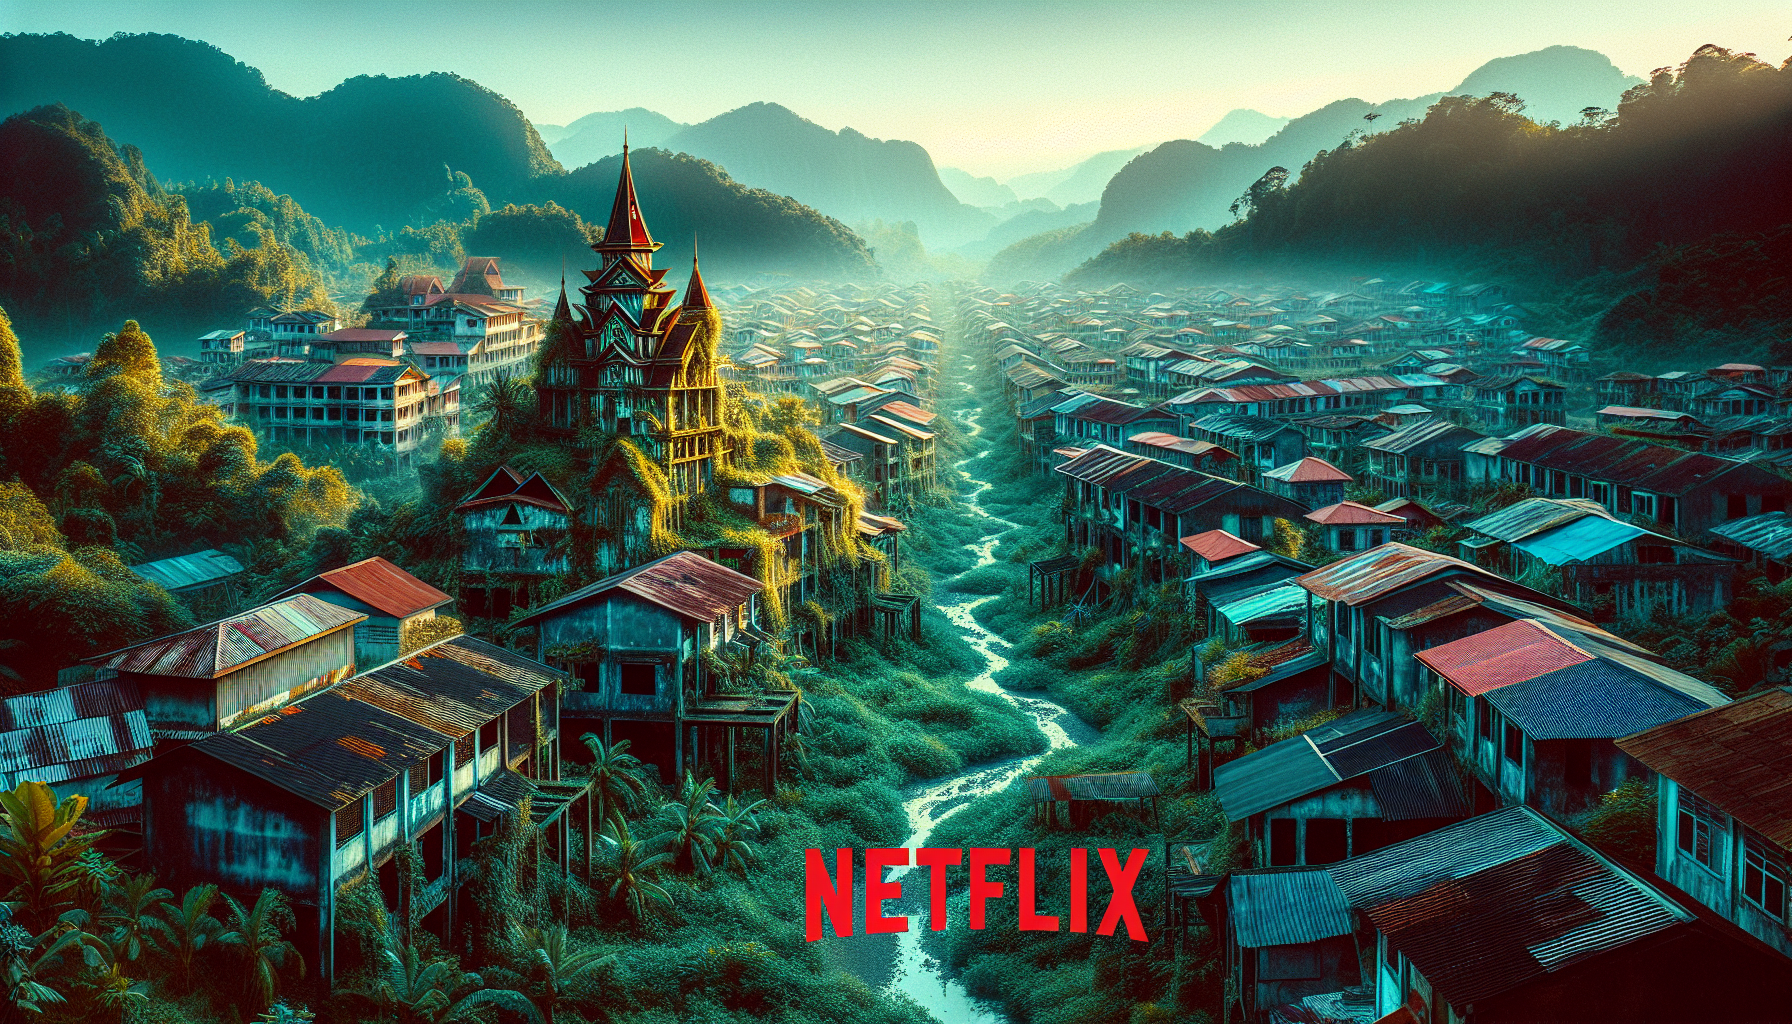 discover the mystery of malaysia's $100 billion ghost town and its newfound fame as a top netflix filming location.